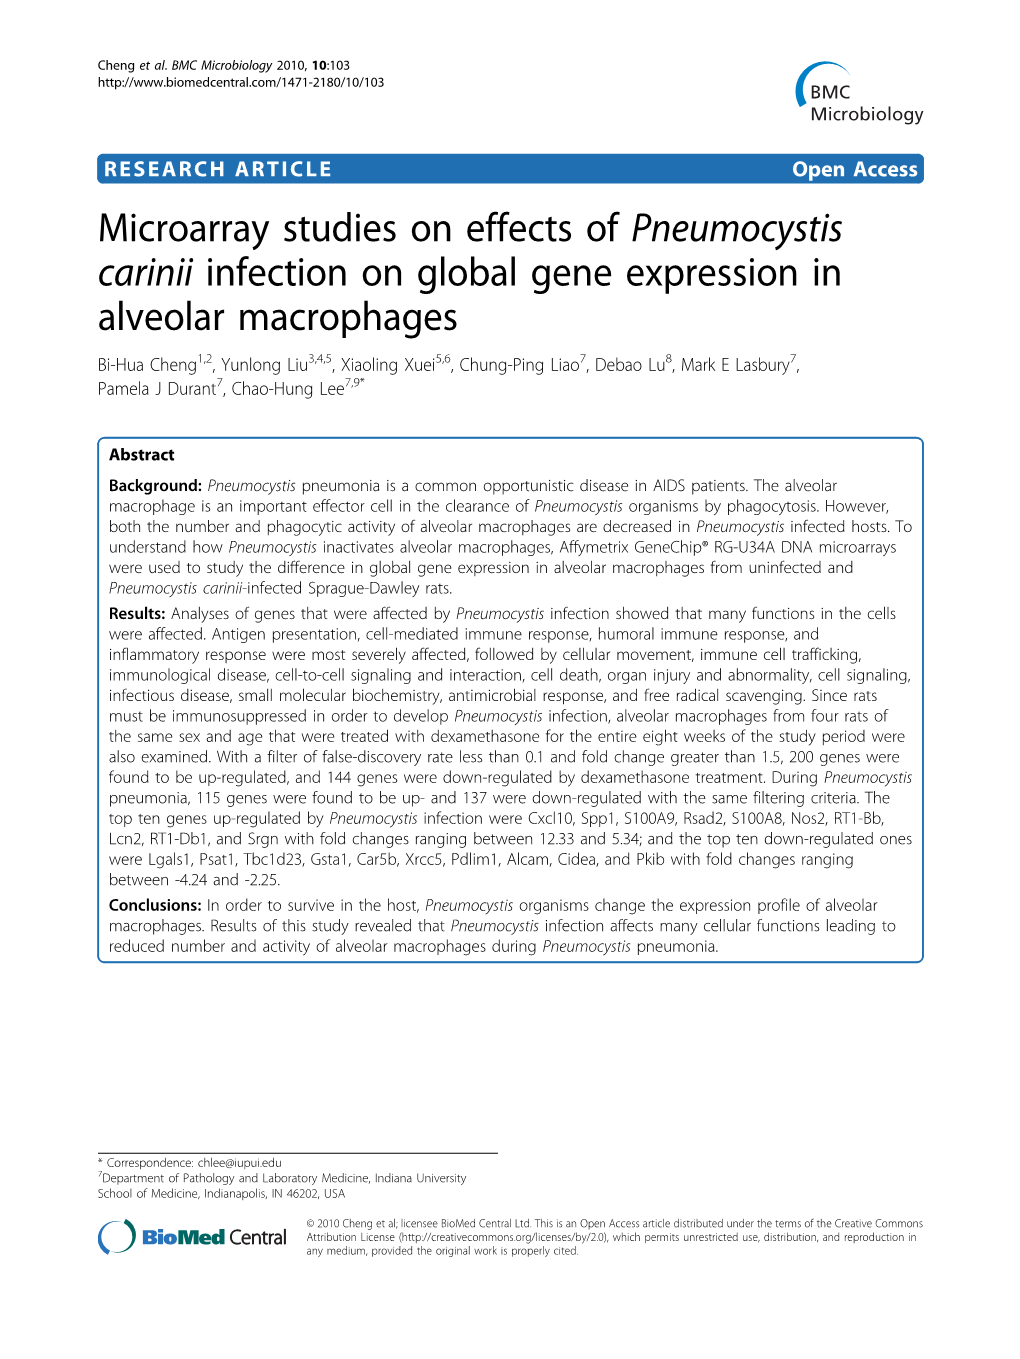 Microarray Studies on Effects of Pneumocystis Carinii Infection On